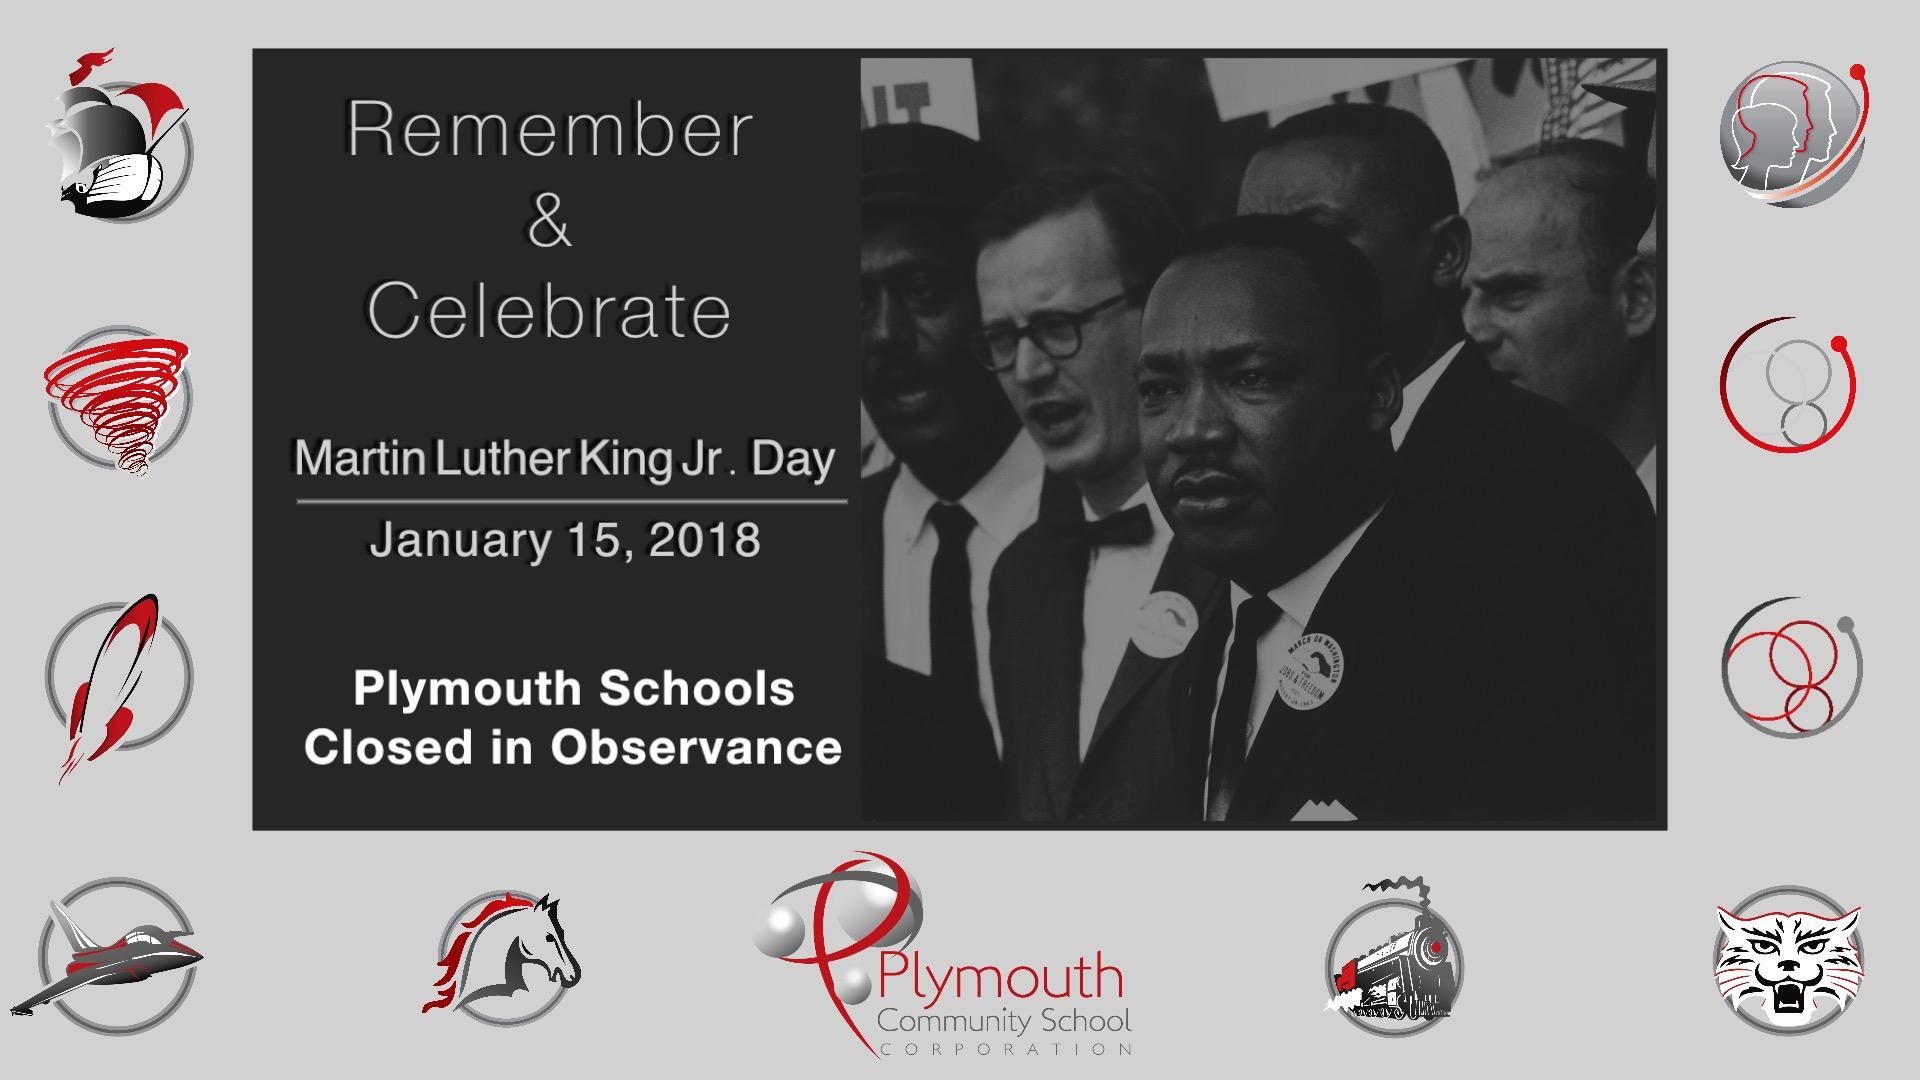 PCSC will be closed on Monday, January 15 in observance of Martin Luther King, Jr. Day.